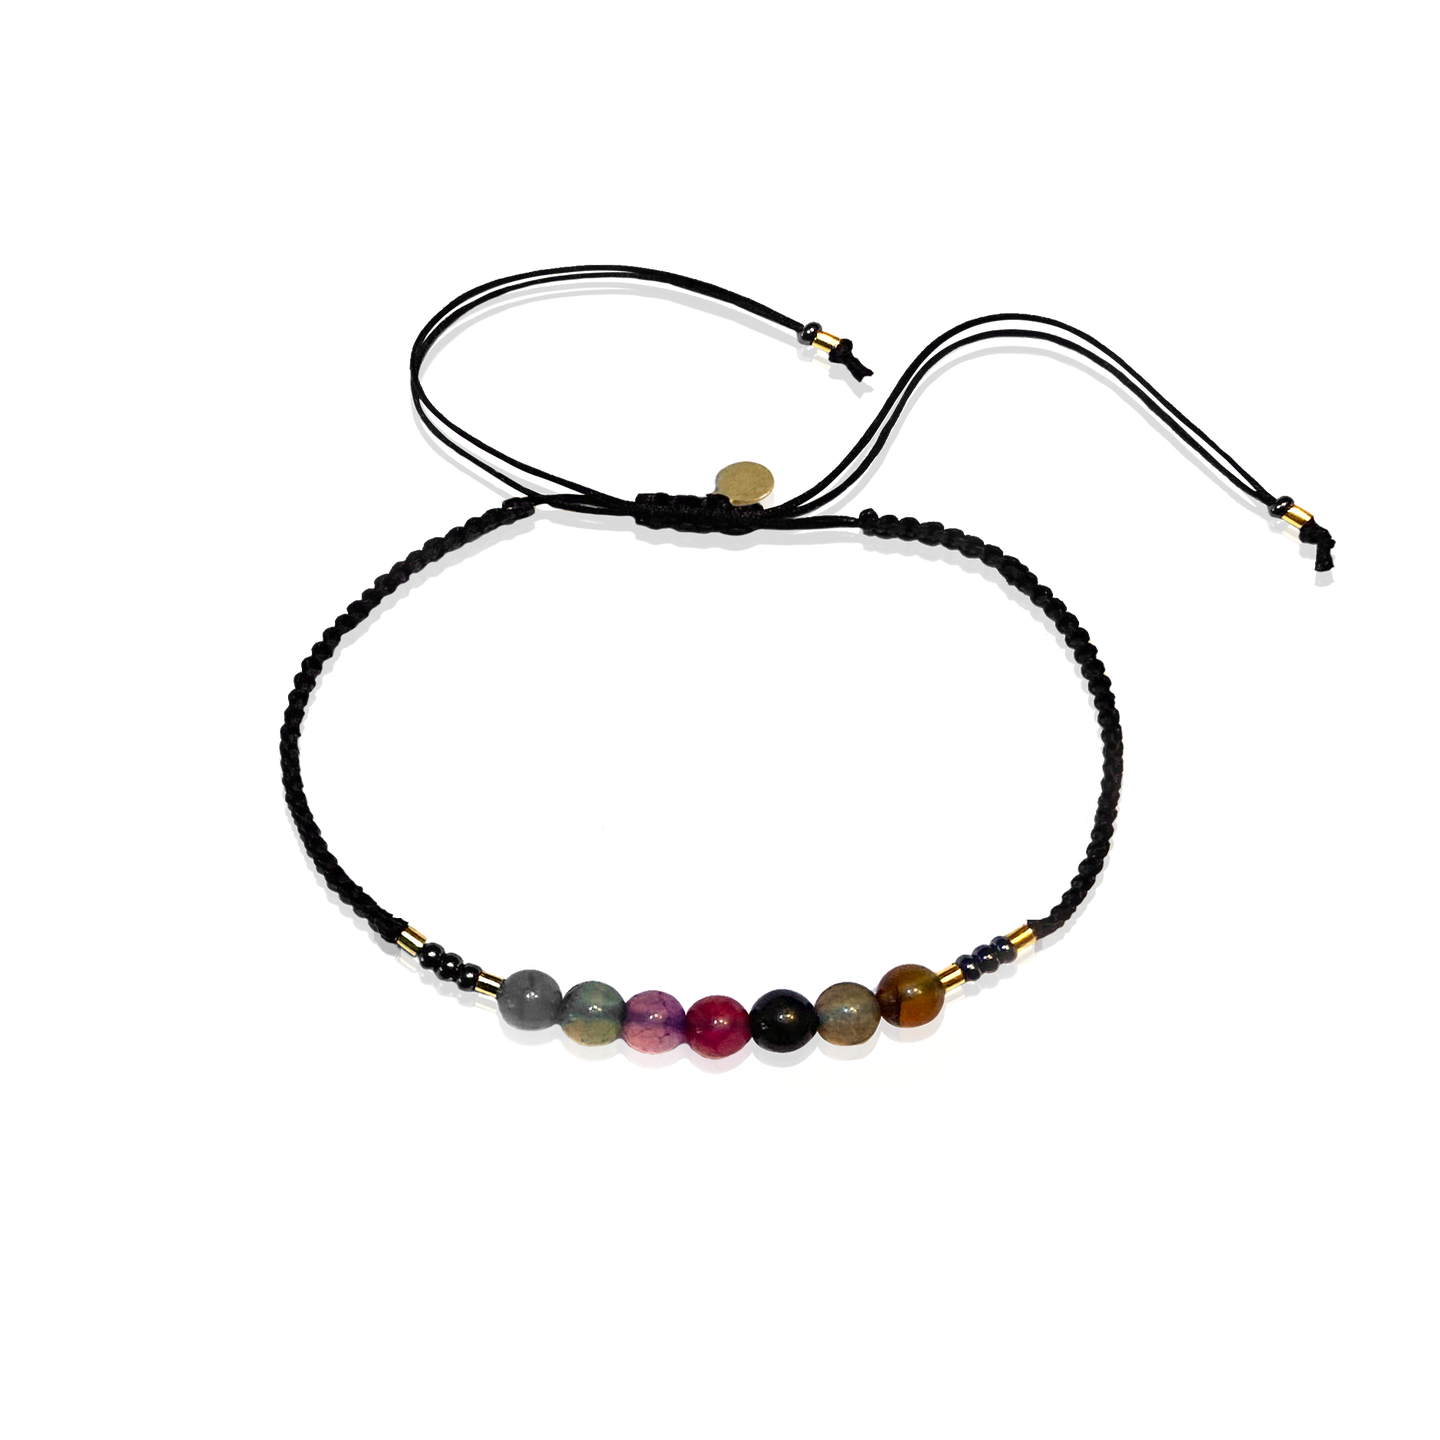 Adjustable handmade Bracelet braided with 7 beautiful gemstones with deep and warm matching colors. This bracelet gives endless possibilities to mix and match.